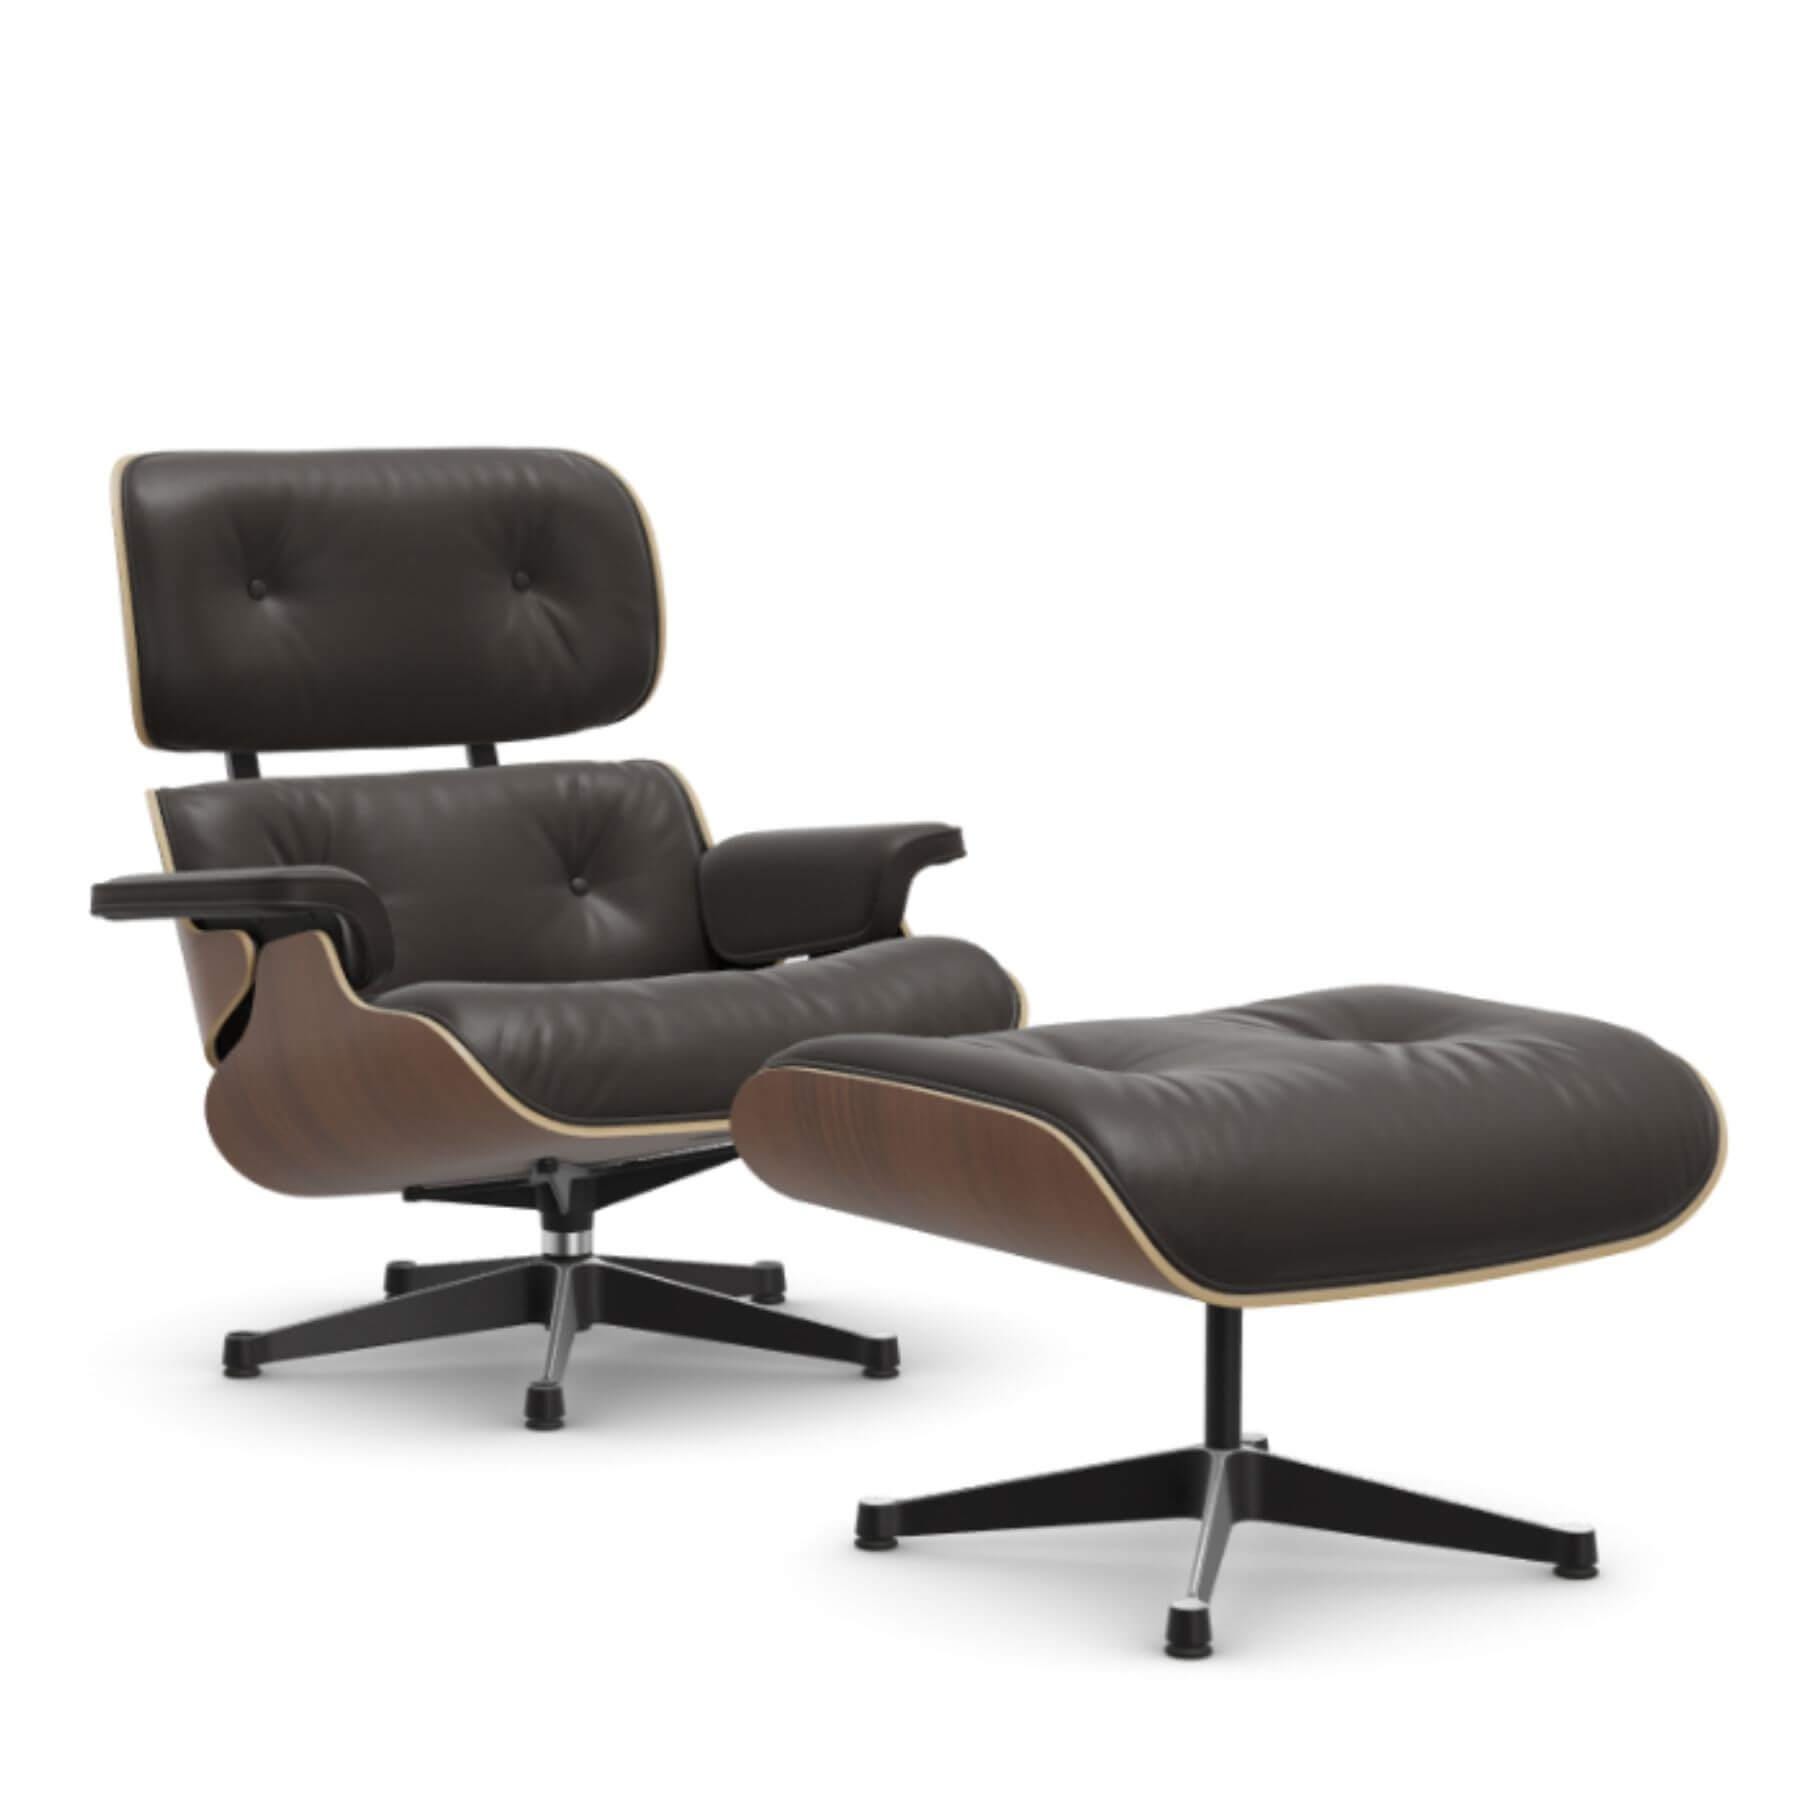 Vitra Eames Lounge Chair Black Pigmented Walnut Leather Natural F Chocolate Polished Black With Ottoman Dark Wood Designer Furniture From Holloway